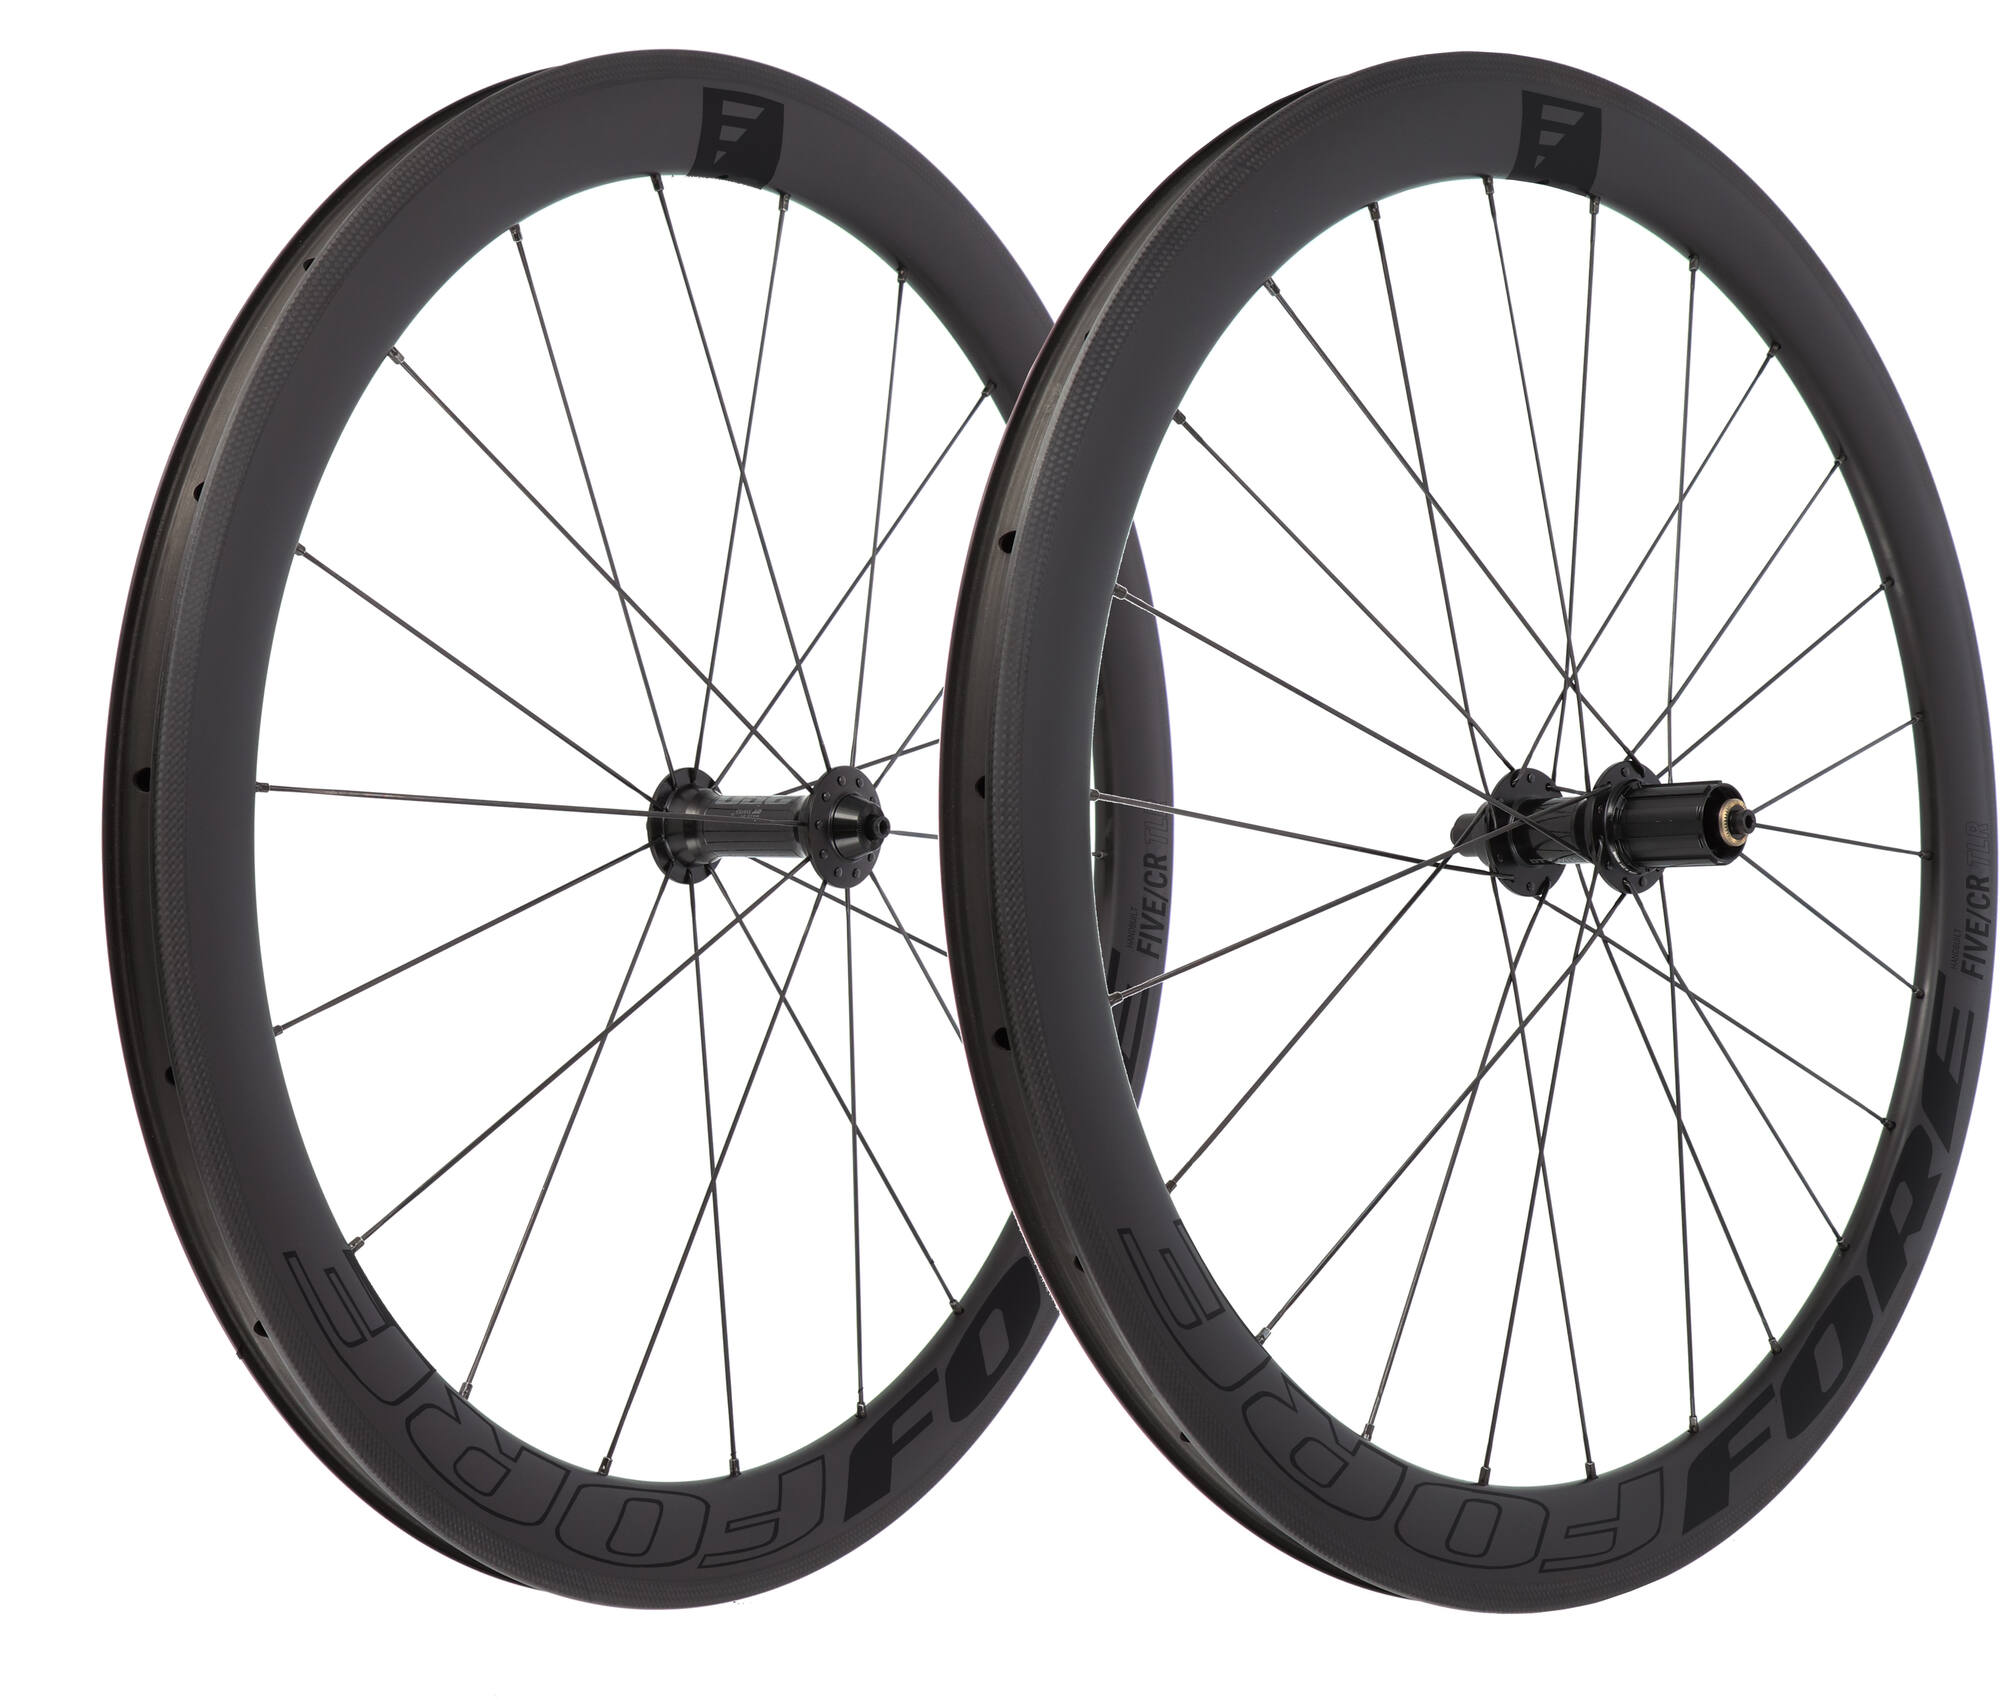 Fore - Five CR DT350 Shimano wheelset including 2x Goodyear Eagle F1 700X25C